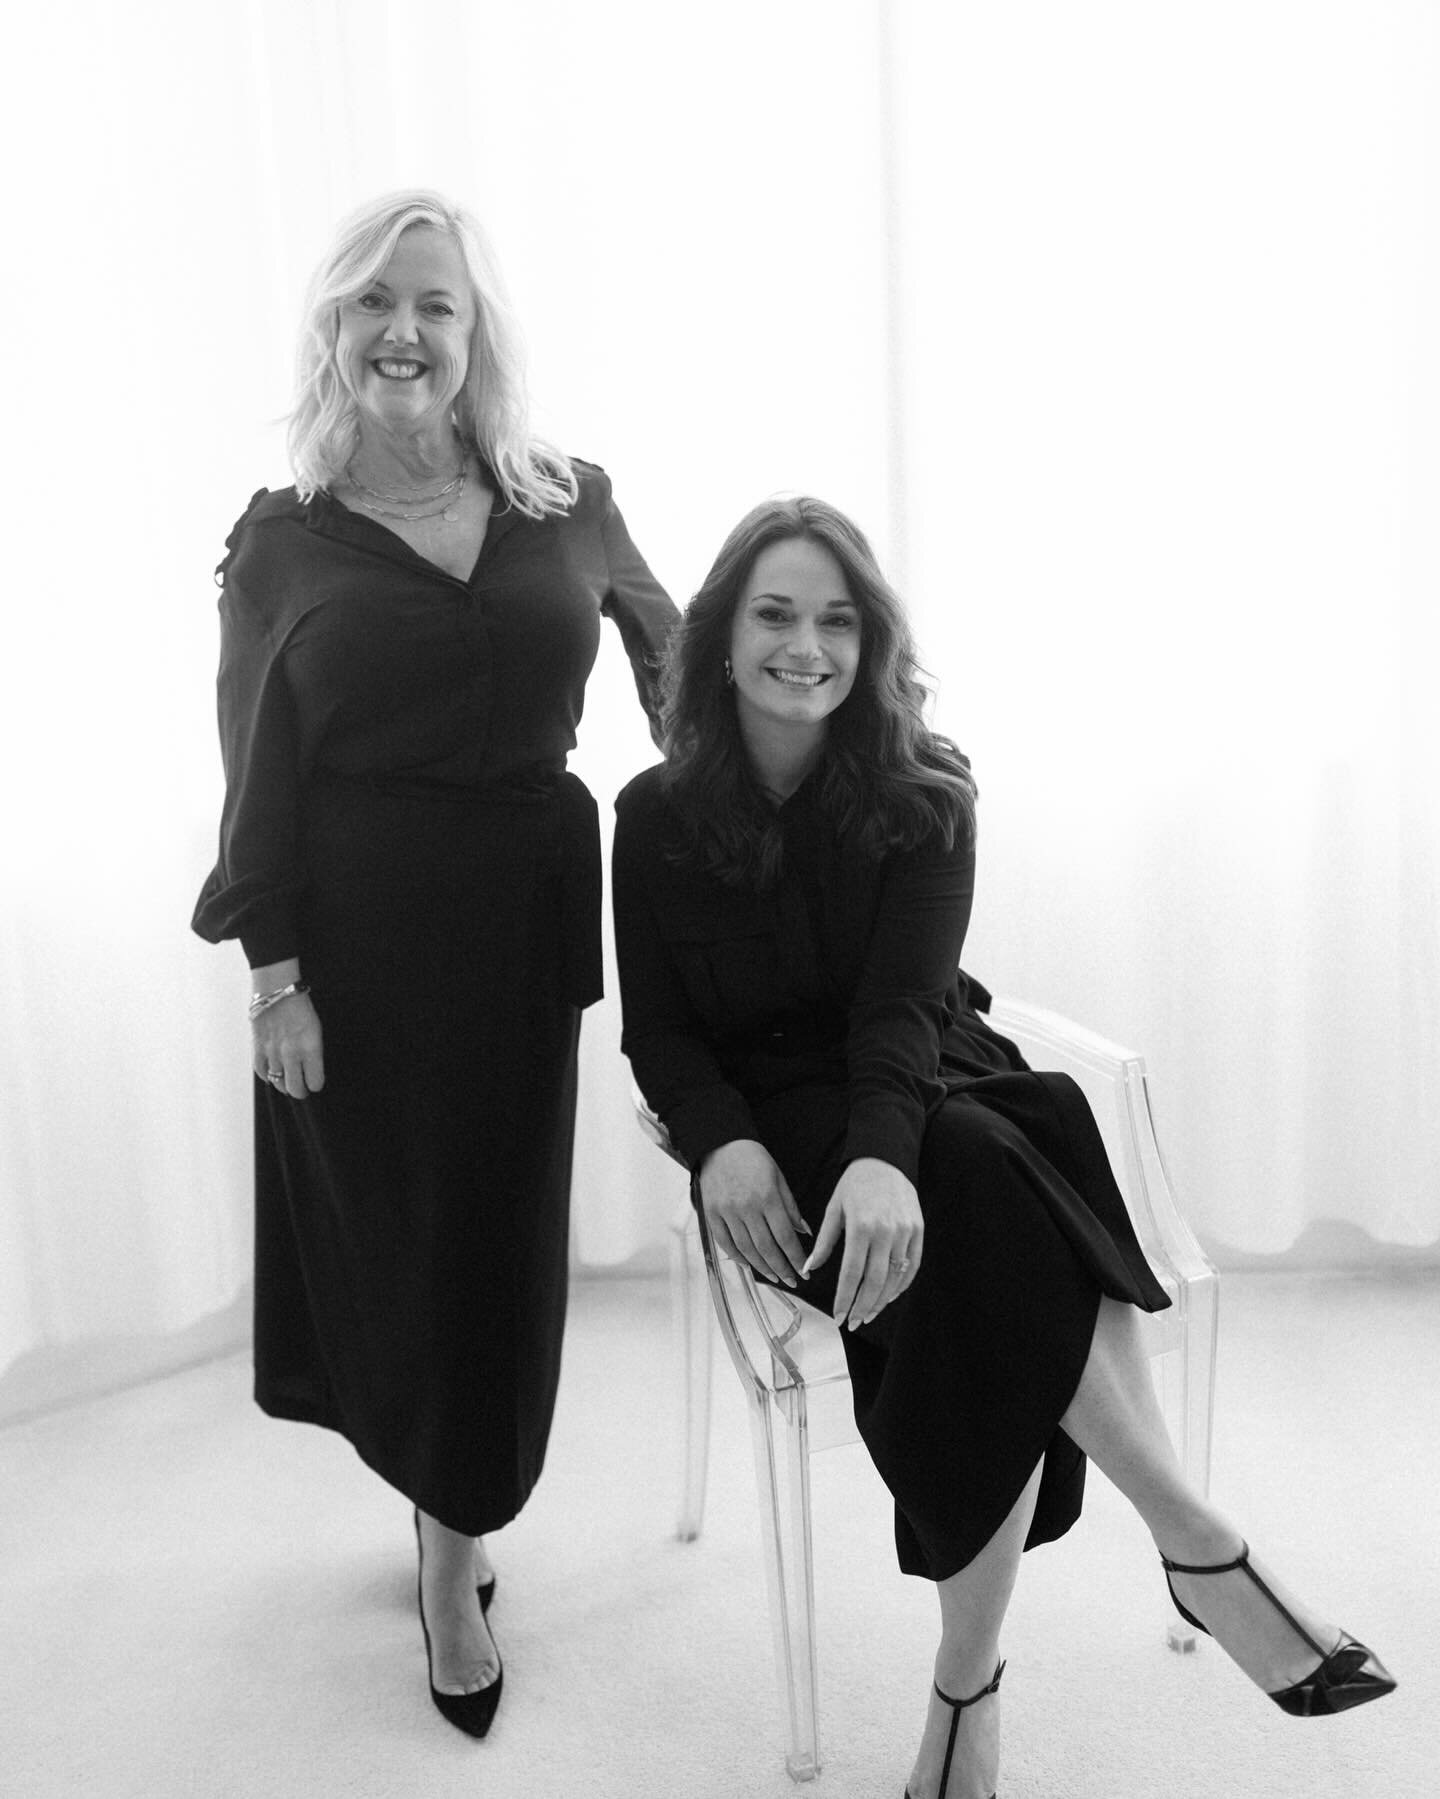 THE PEOPLE BEHIND THE BRAND // We&rsquo;re the proud founders of Team Glam, Carla Brooks and Tara Cox. We specialise in providing unparalleled beauty services for weddings and events. With our extensive experience and passion for all things beauty, w